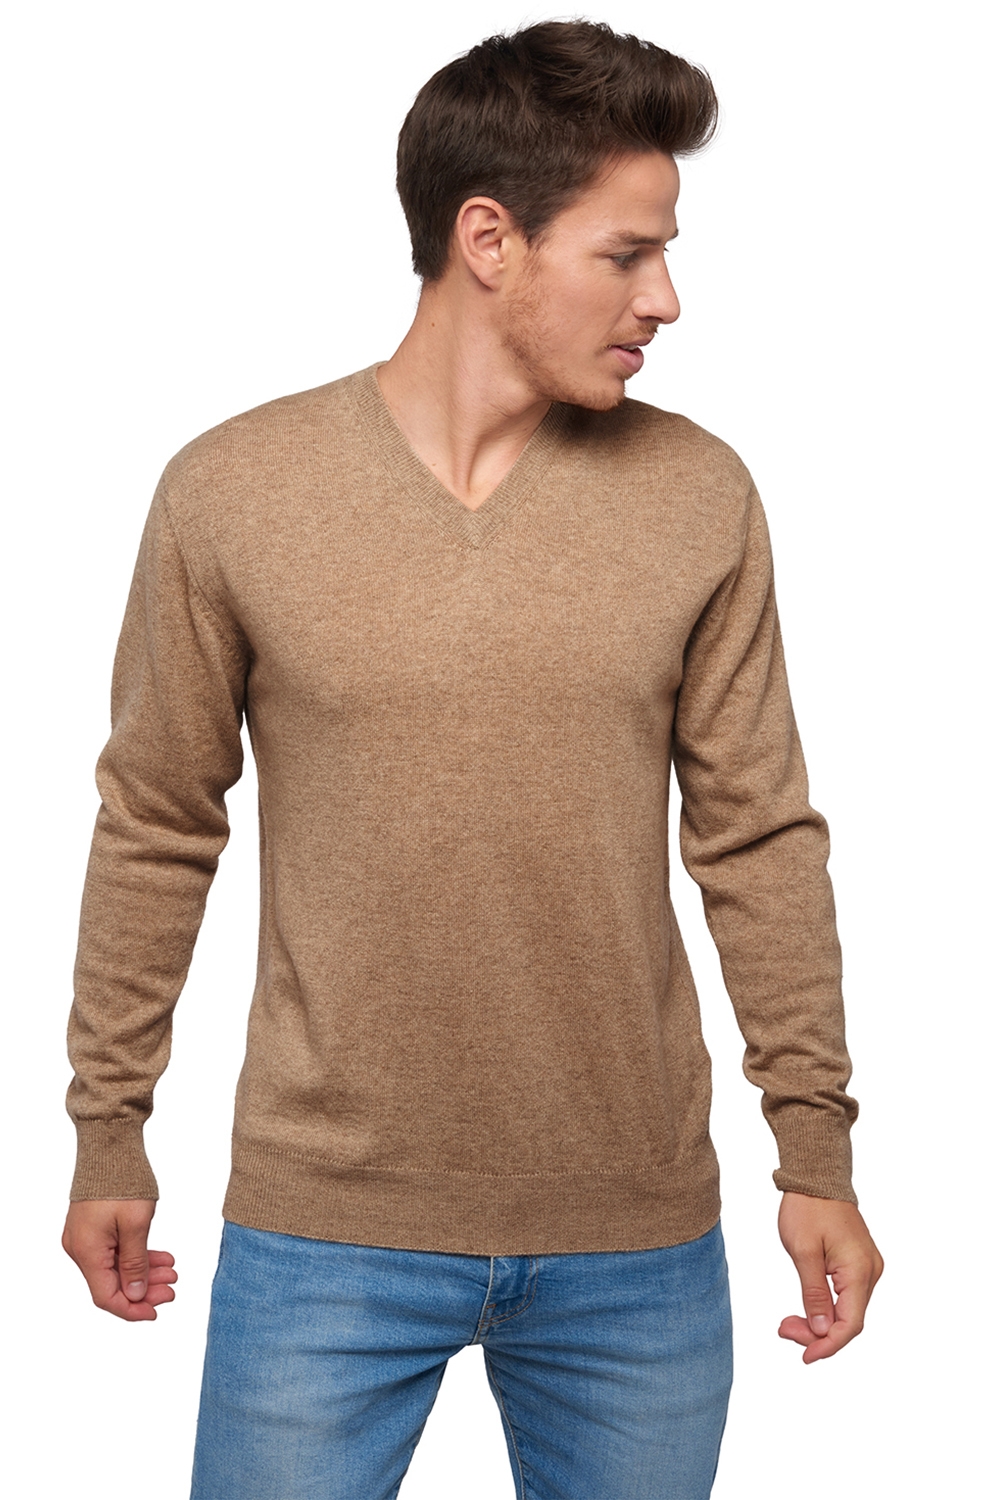 Cachemire Naturel pull homme col v natural poppy 4f natural brown 3xl